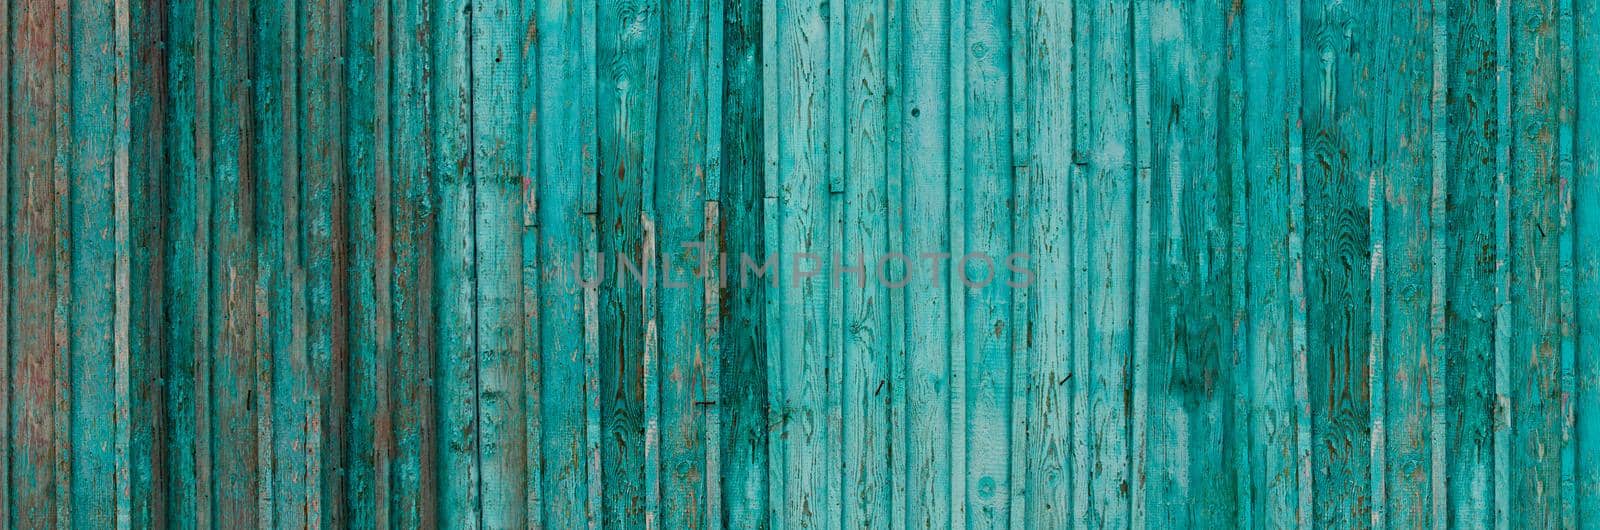 Gray wood texture banner with traces of cracked aquamarine paint.Abstract background,blank template. rustic weathered wood barn background with scratches,nails and knots.Copy space. by Alla_Morozova93